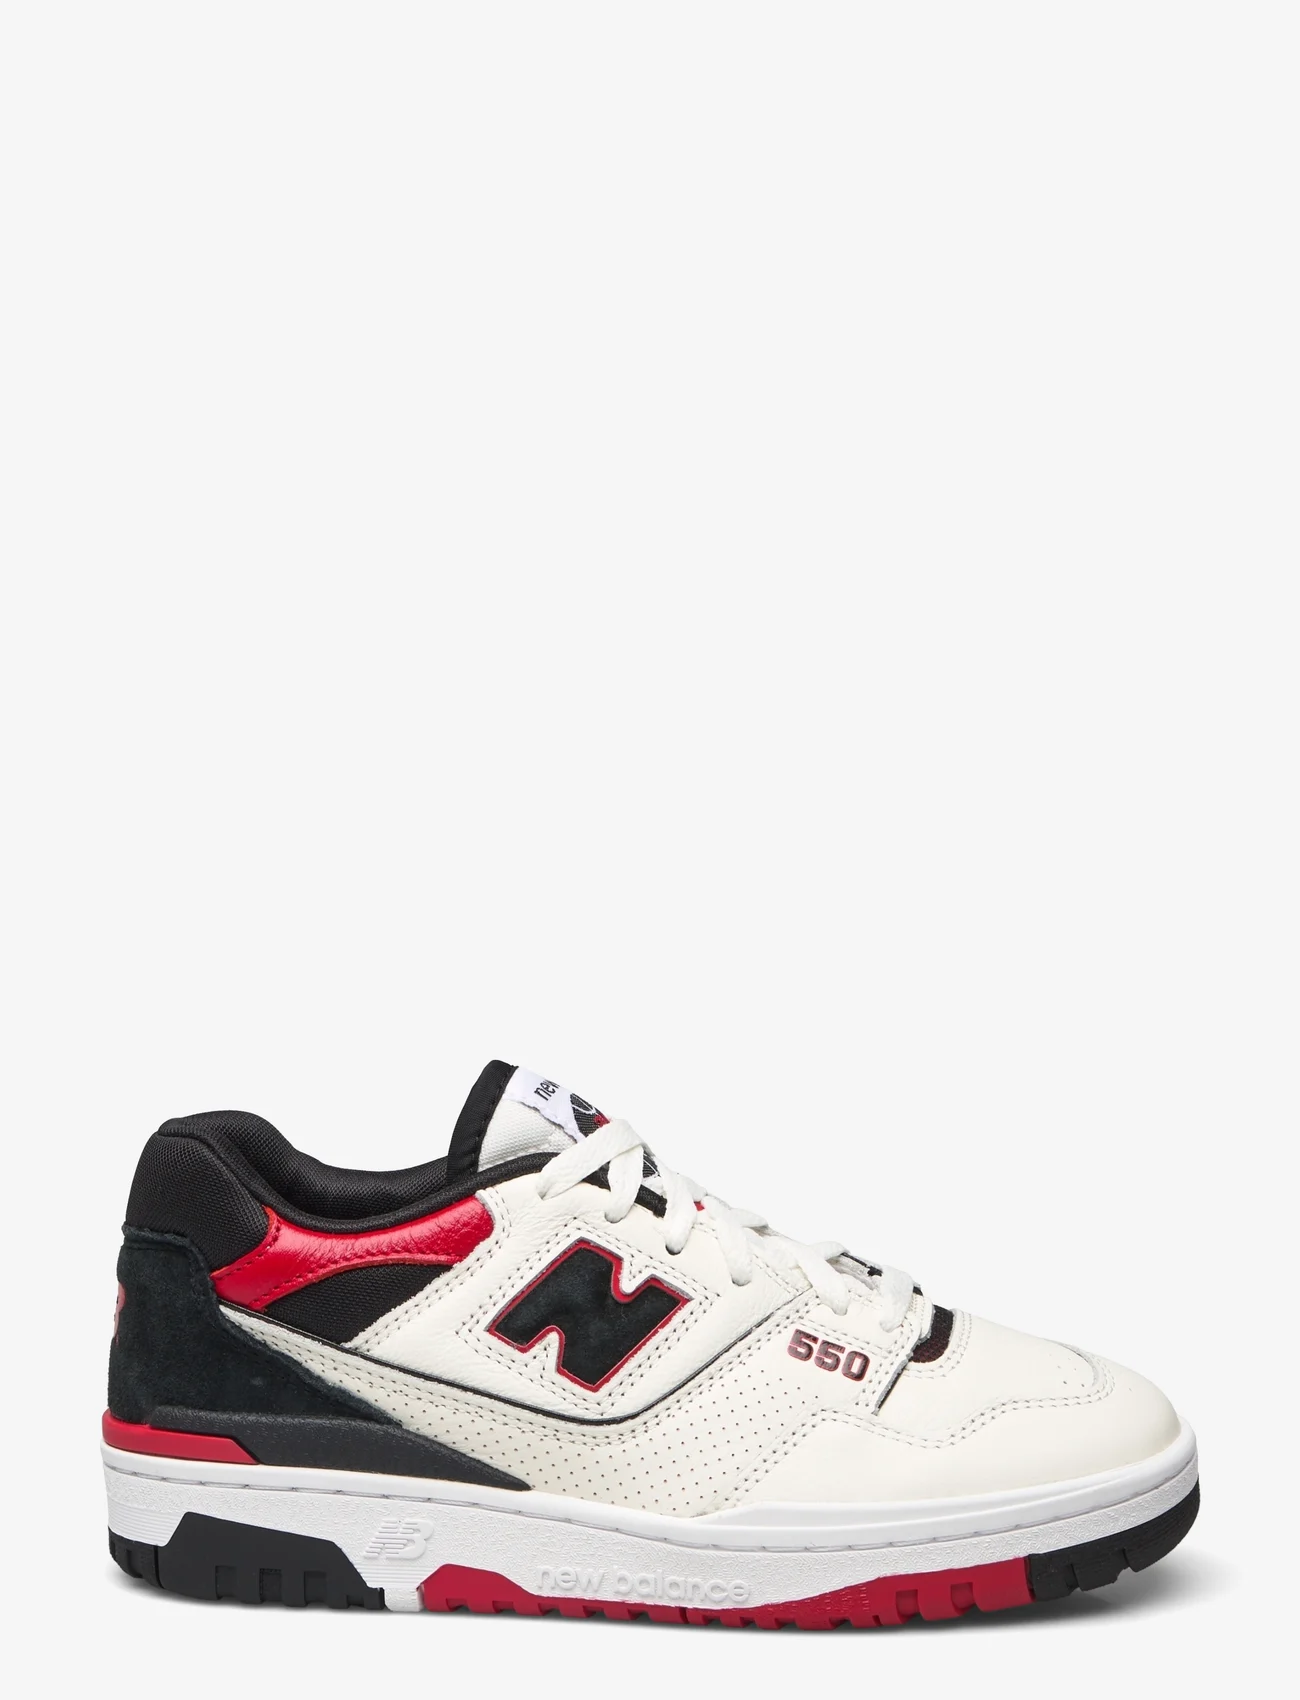 New Balance - New Balance BB550 - lave sneakers - white - 1